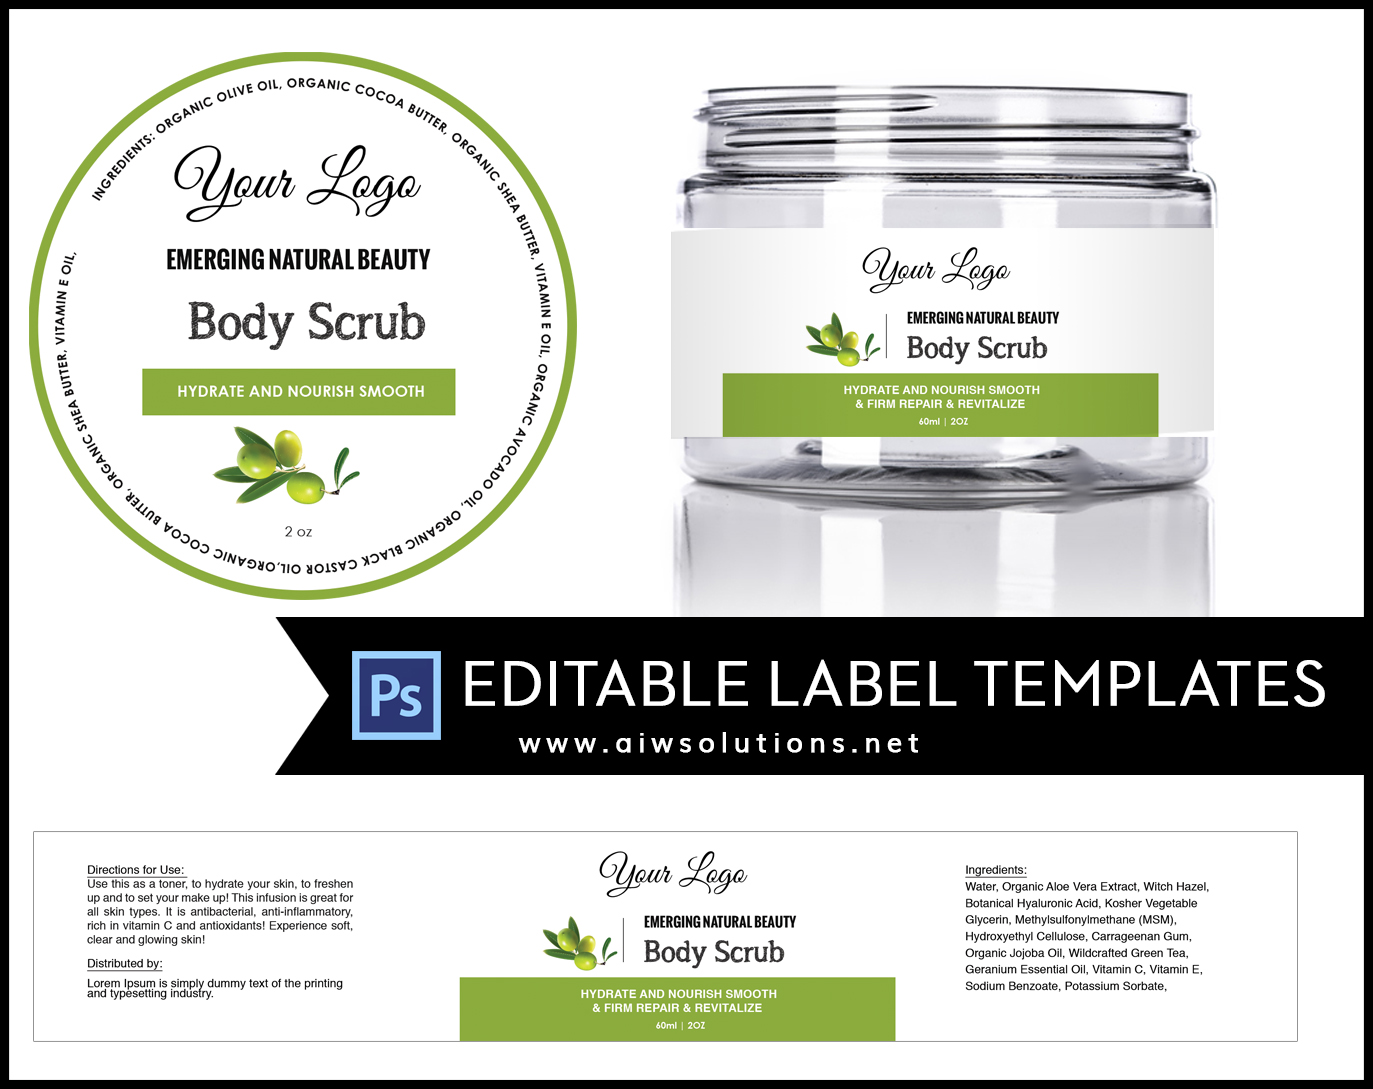 Product Label Templates